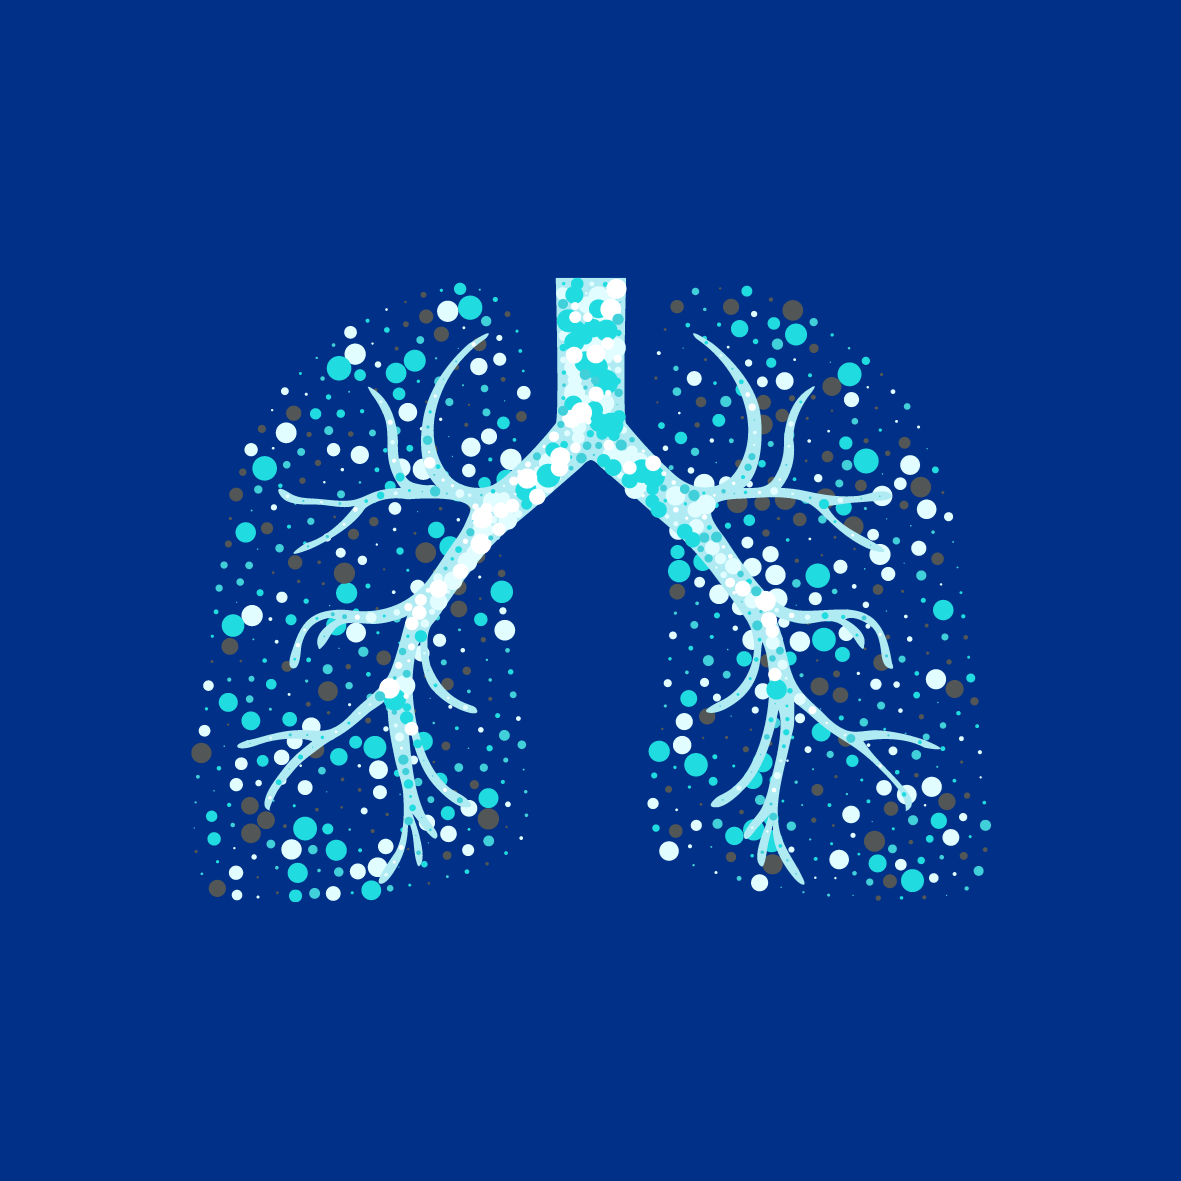 Image of Lungs to Represent COPD